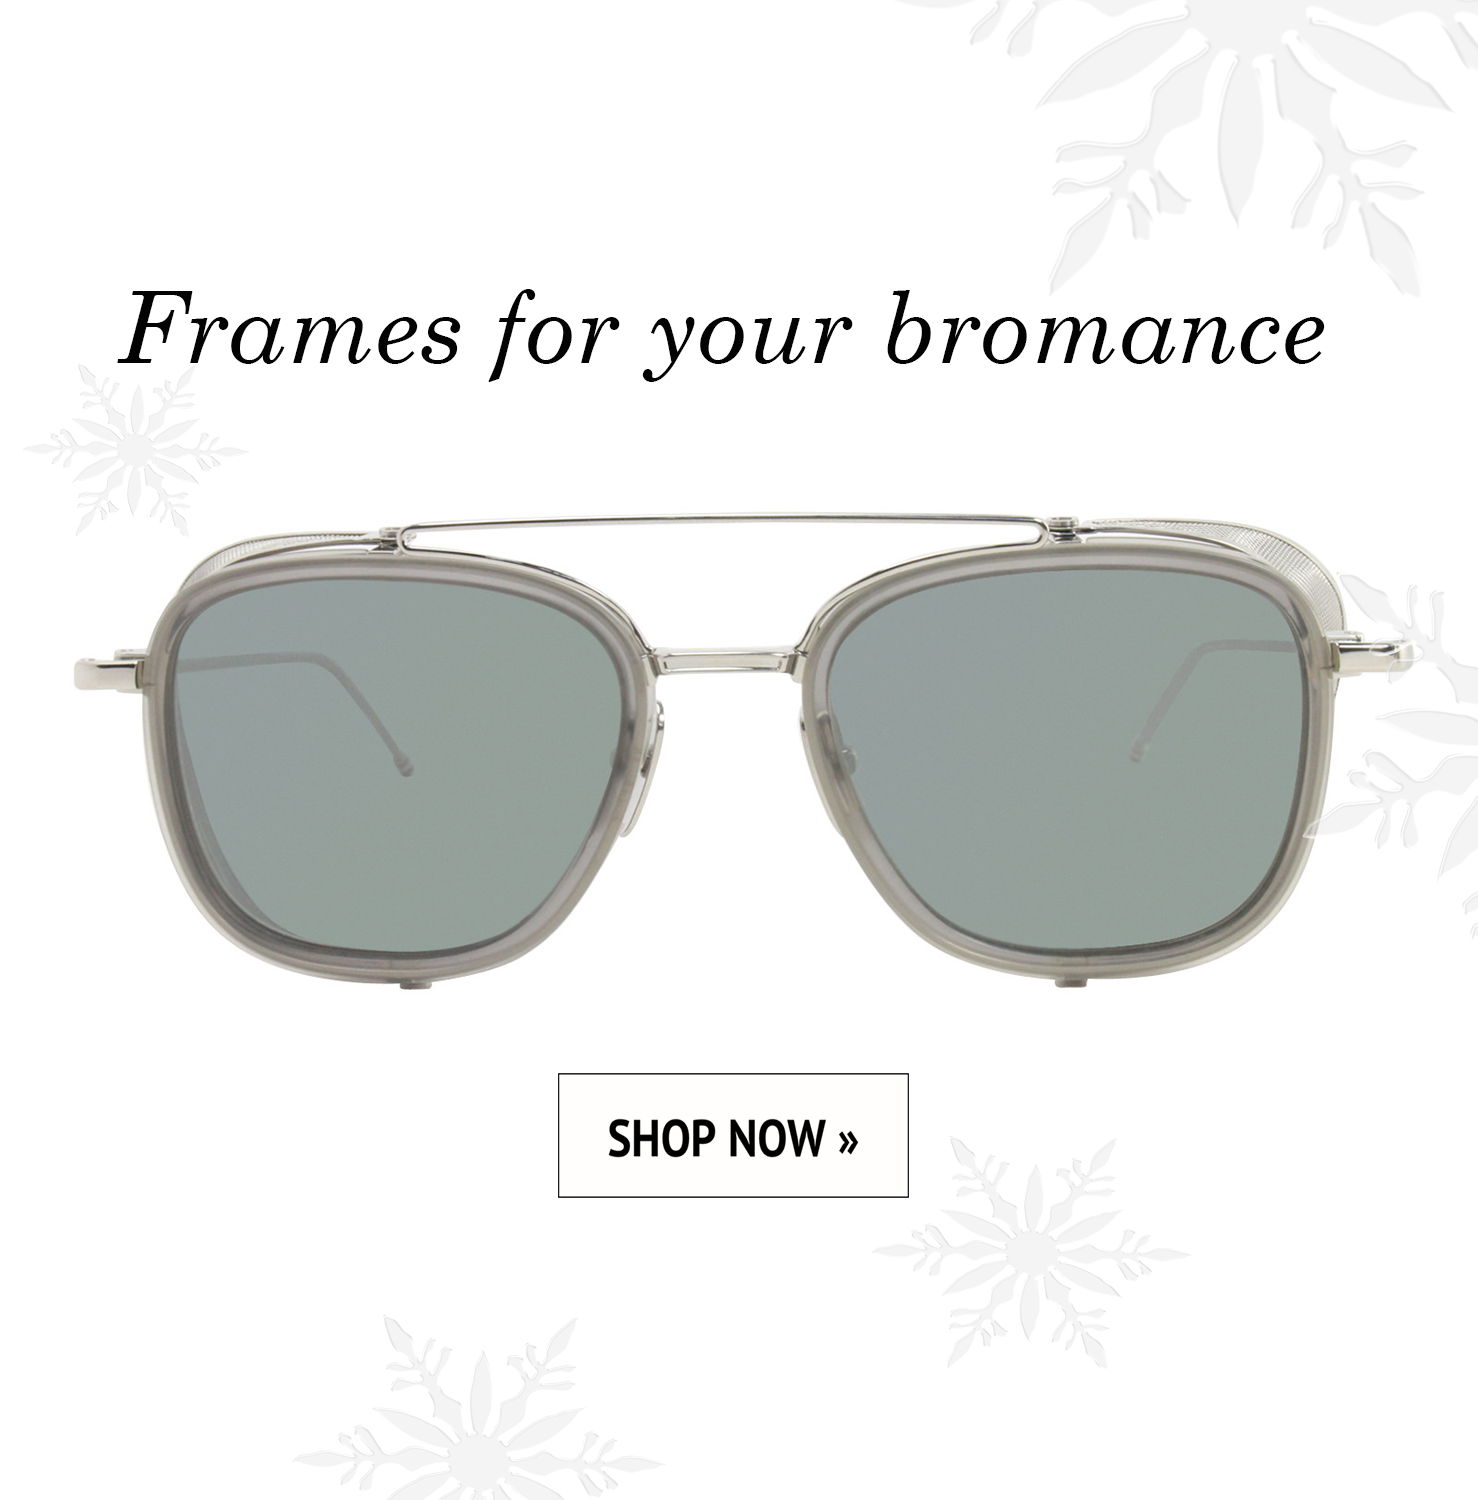 frames for your bromance